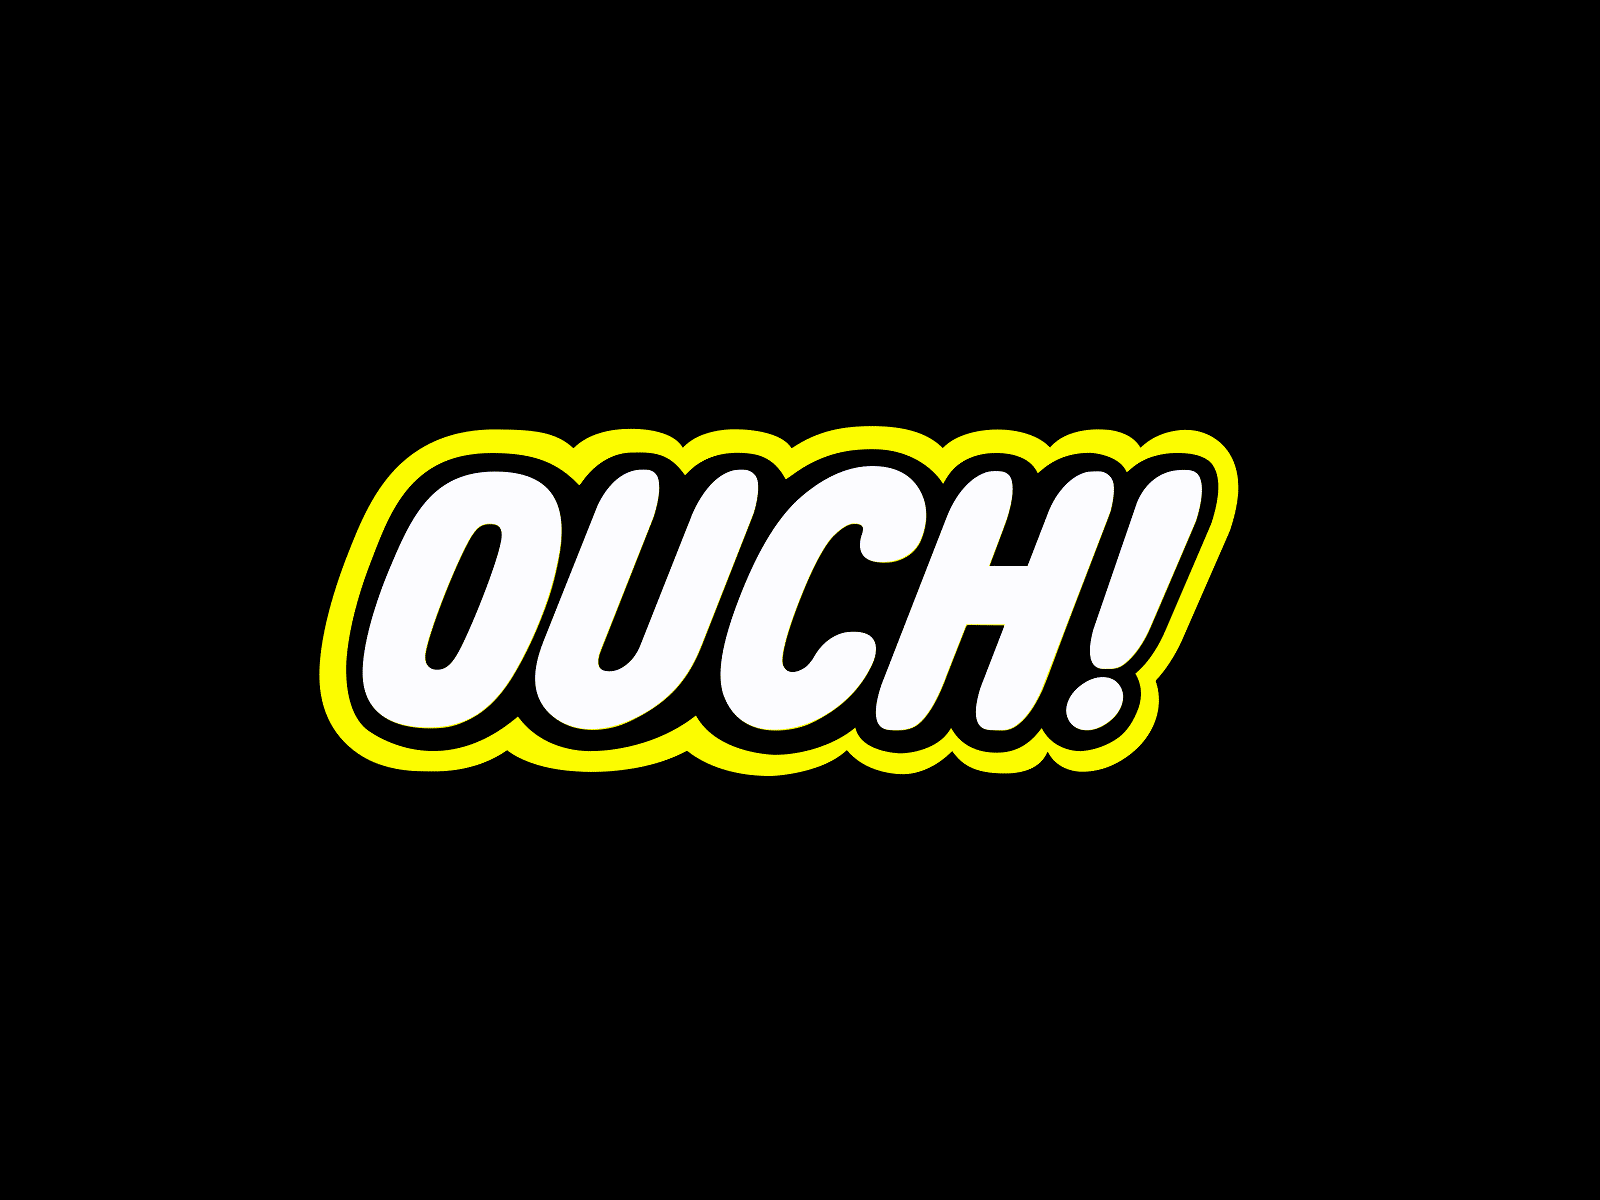 OUCH! Glitch Logo animation Design for Gaming Purpose